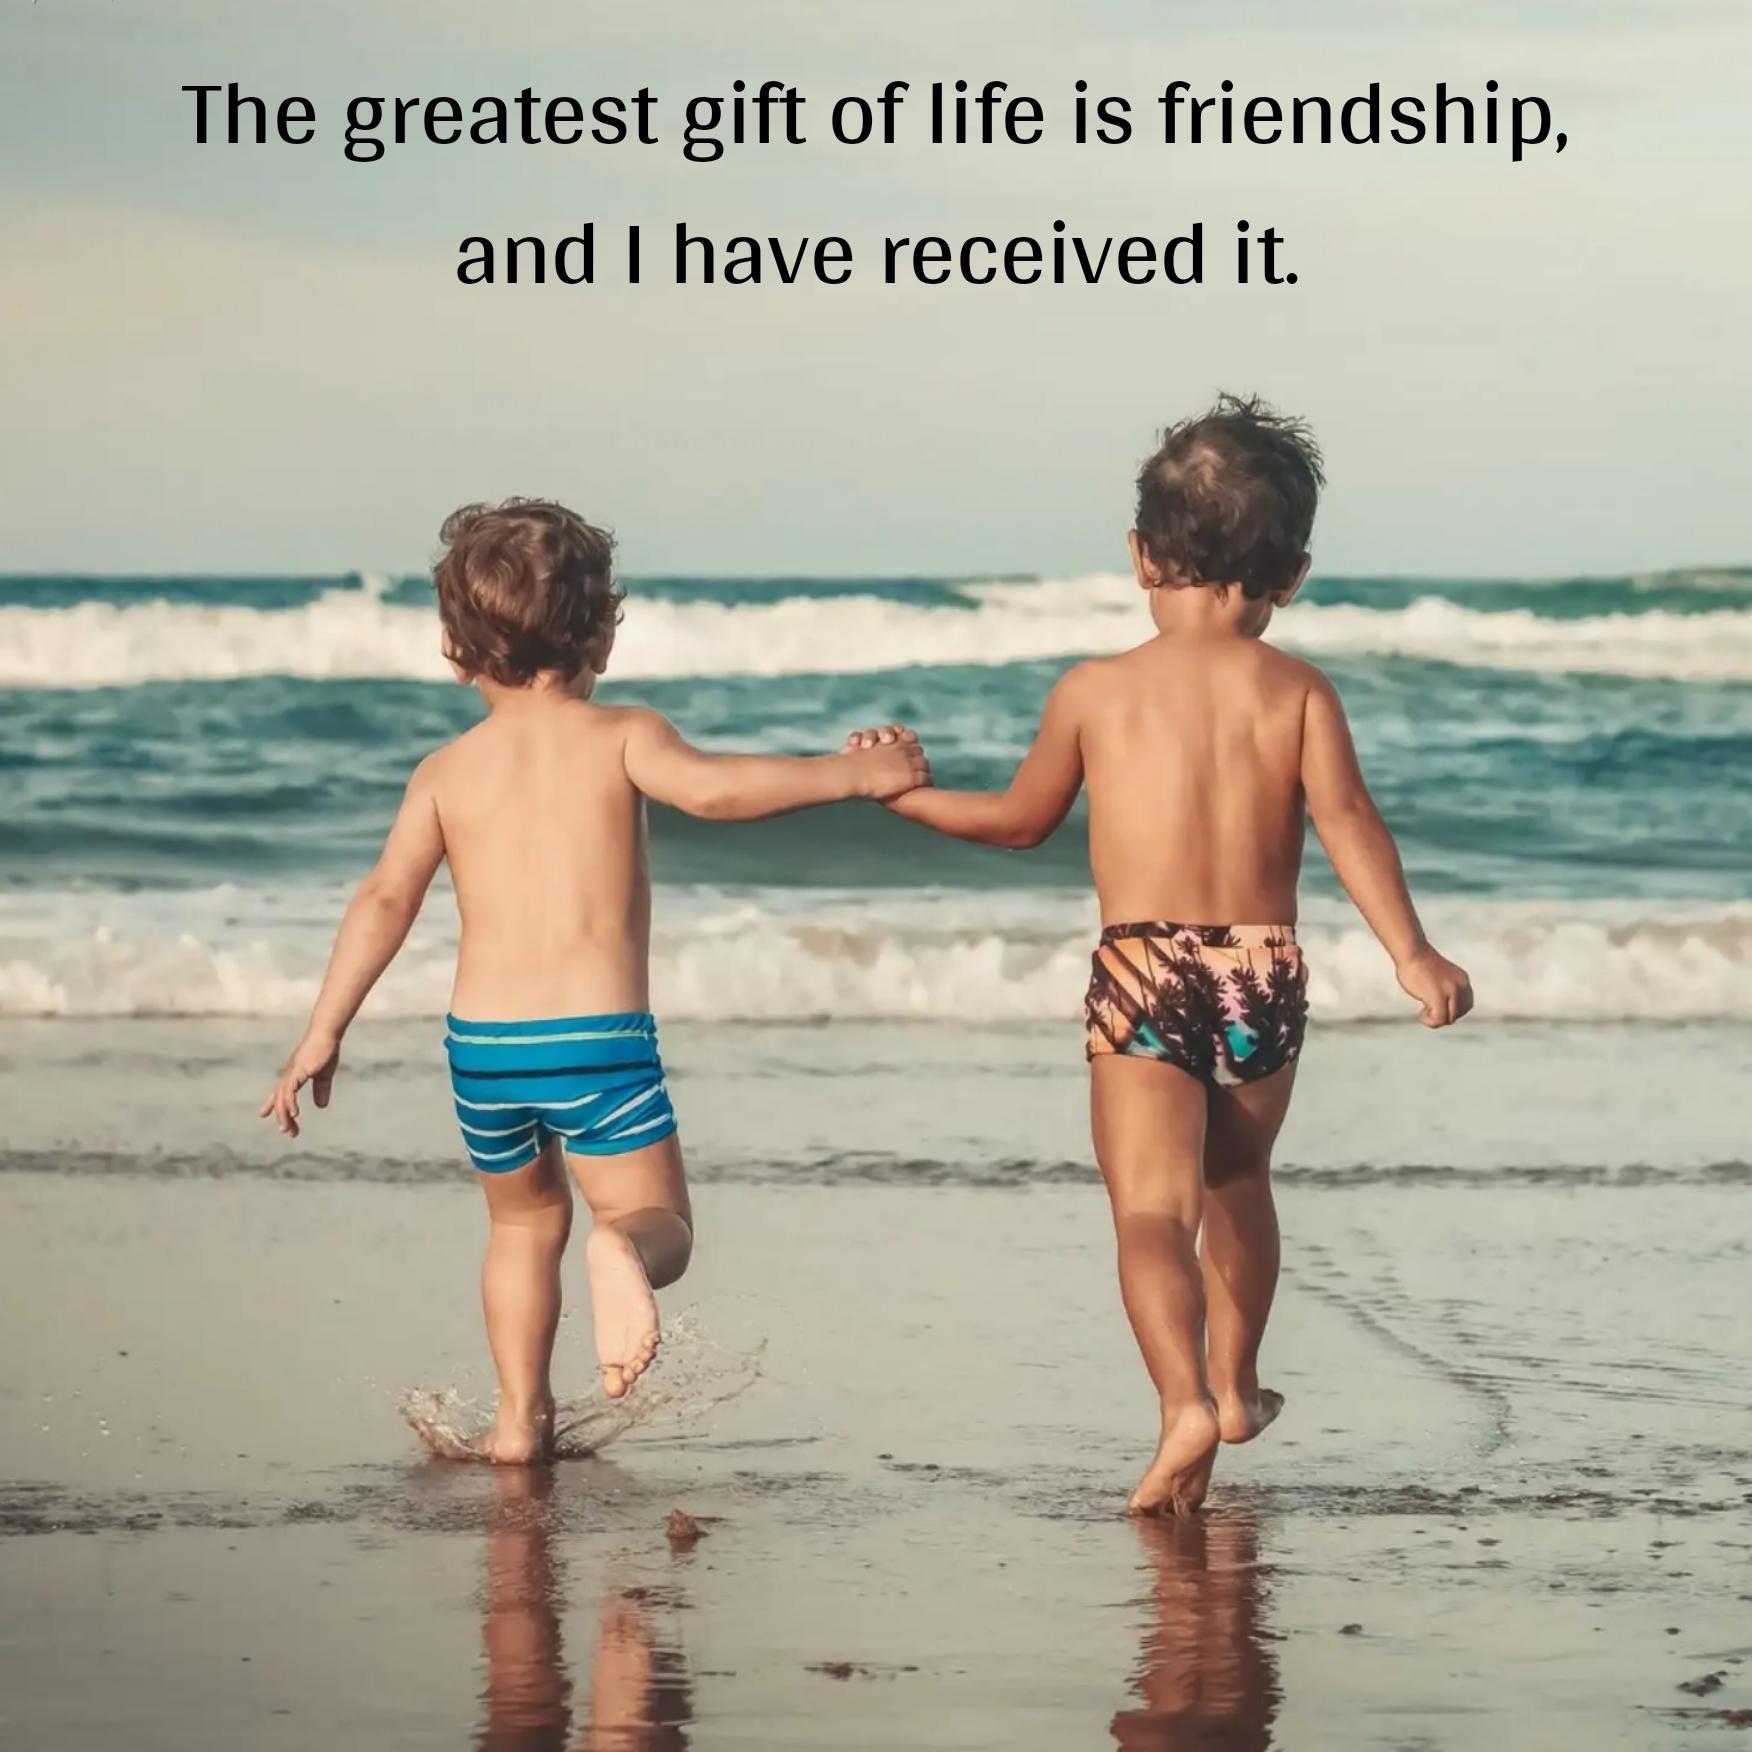 The greatest gift of life is friendship and I have received it